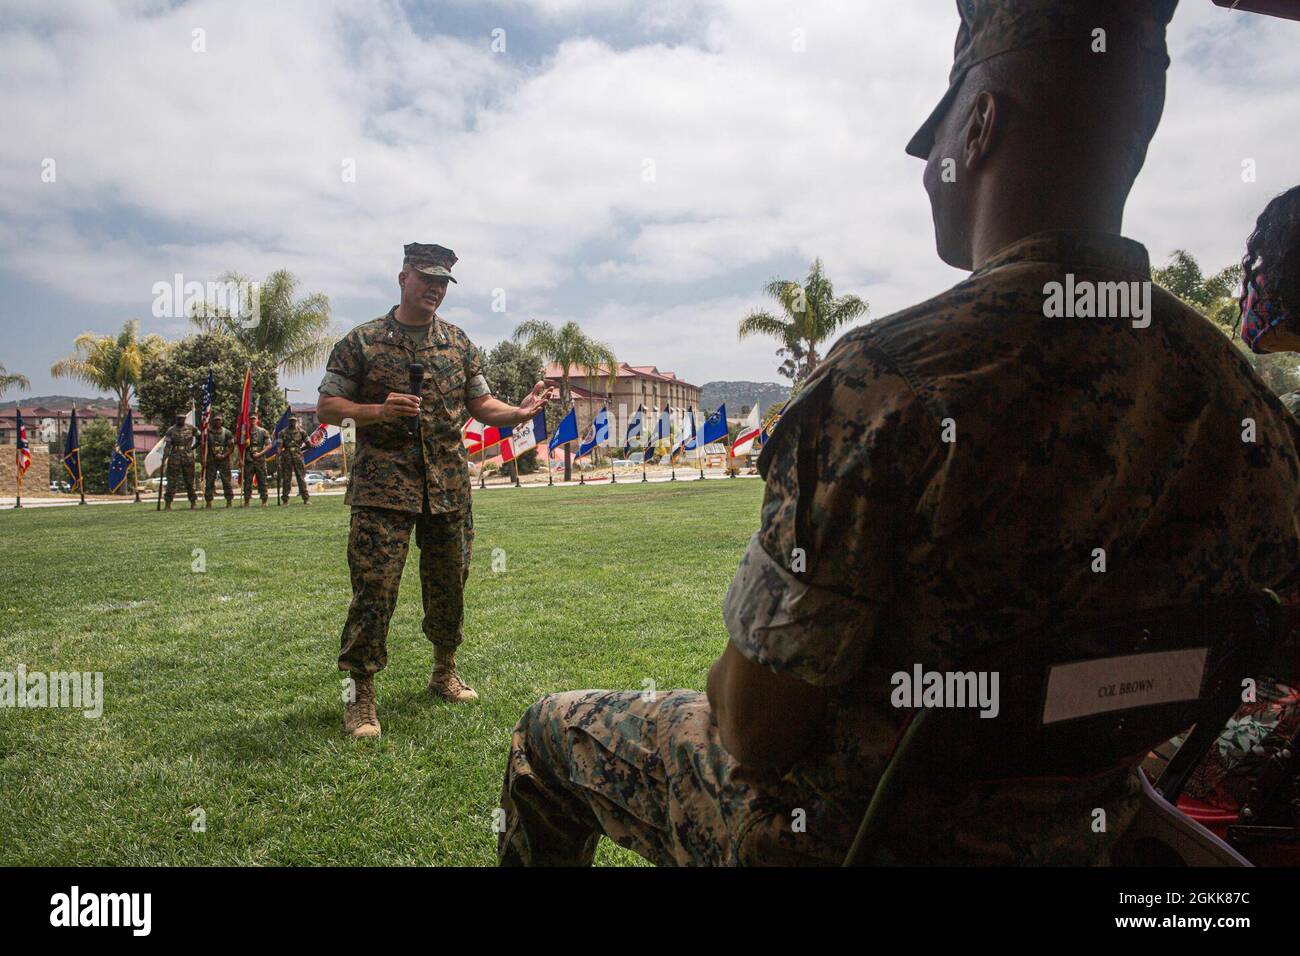 U.S. Marine Corps Col. John S. McCalmont, commanding officer, Combat Logistics Regiment 17, 1st Marine Logistics Group, gives remarks during the Combat Logistics Regiment 17 change of command ceremony at Marine Corps Base Camp Pendleton May 13, 2021. Since 1992, CLR-17 has provided command and control, administration, communications, food services and services to the 1st MLG. Stock Photo